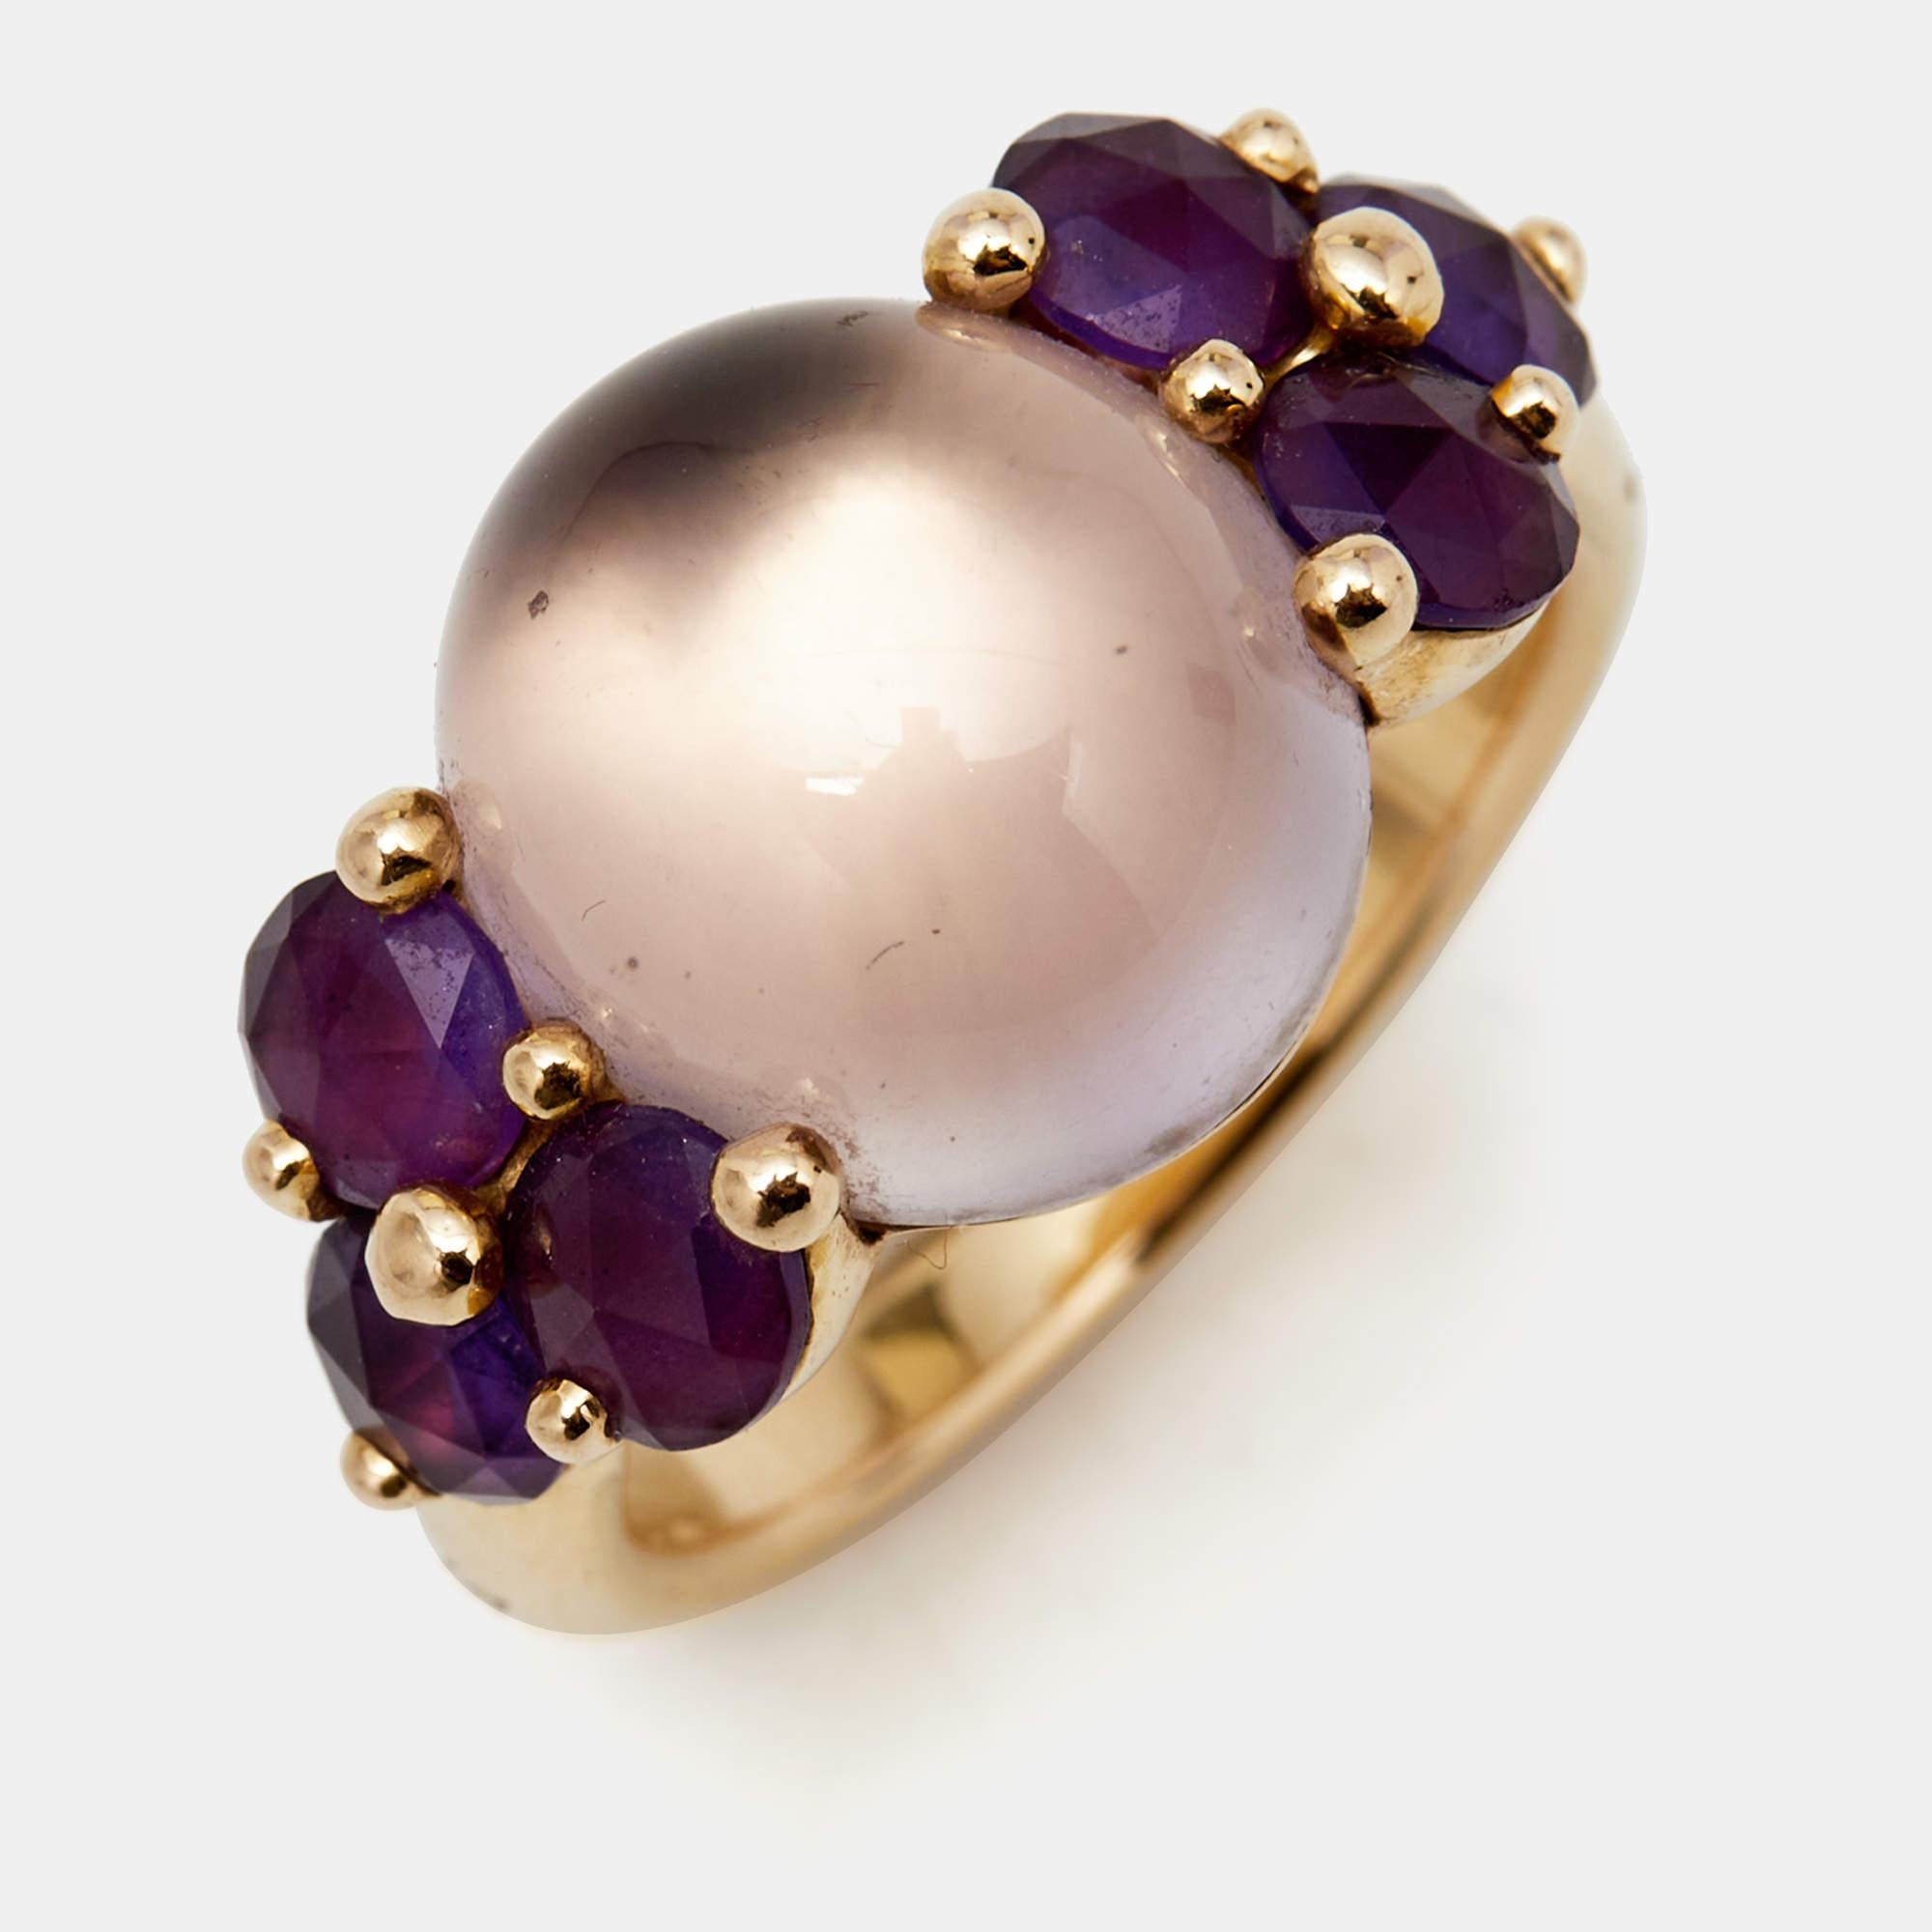 Pomellato's commitment to delivering excellence is beautifully manifested in this cocktail ring. Every detail on this ring speaks of creativity, elegance, and luxury. Rendered in a remarkable silhouette with notably-sized Amethyst on the head and